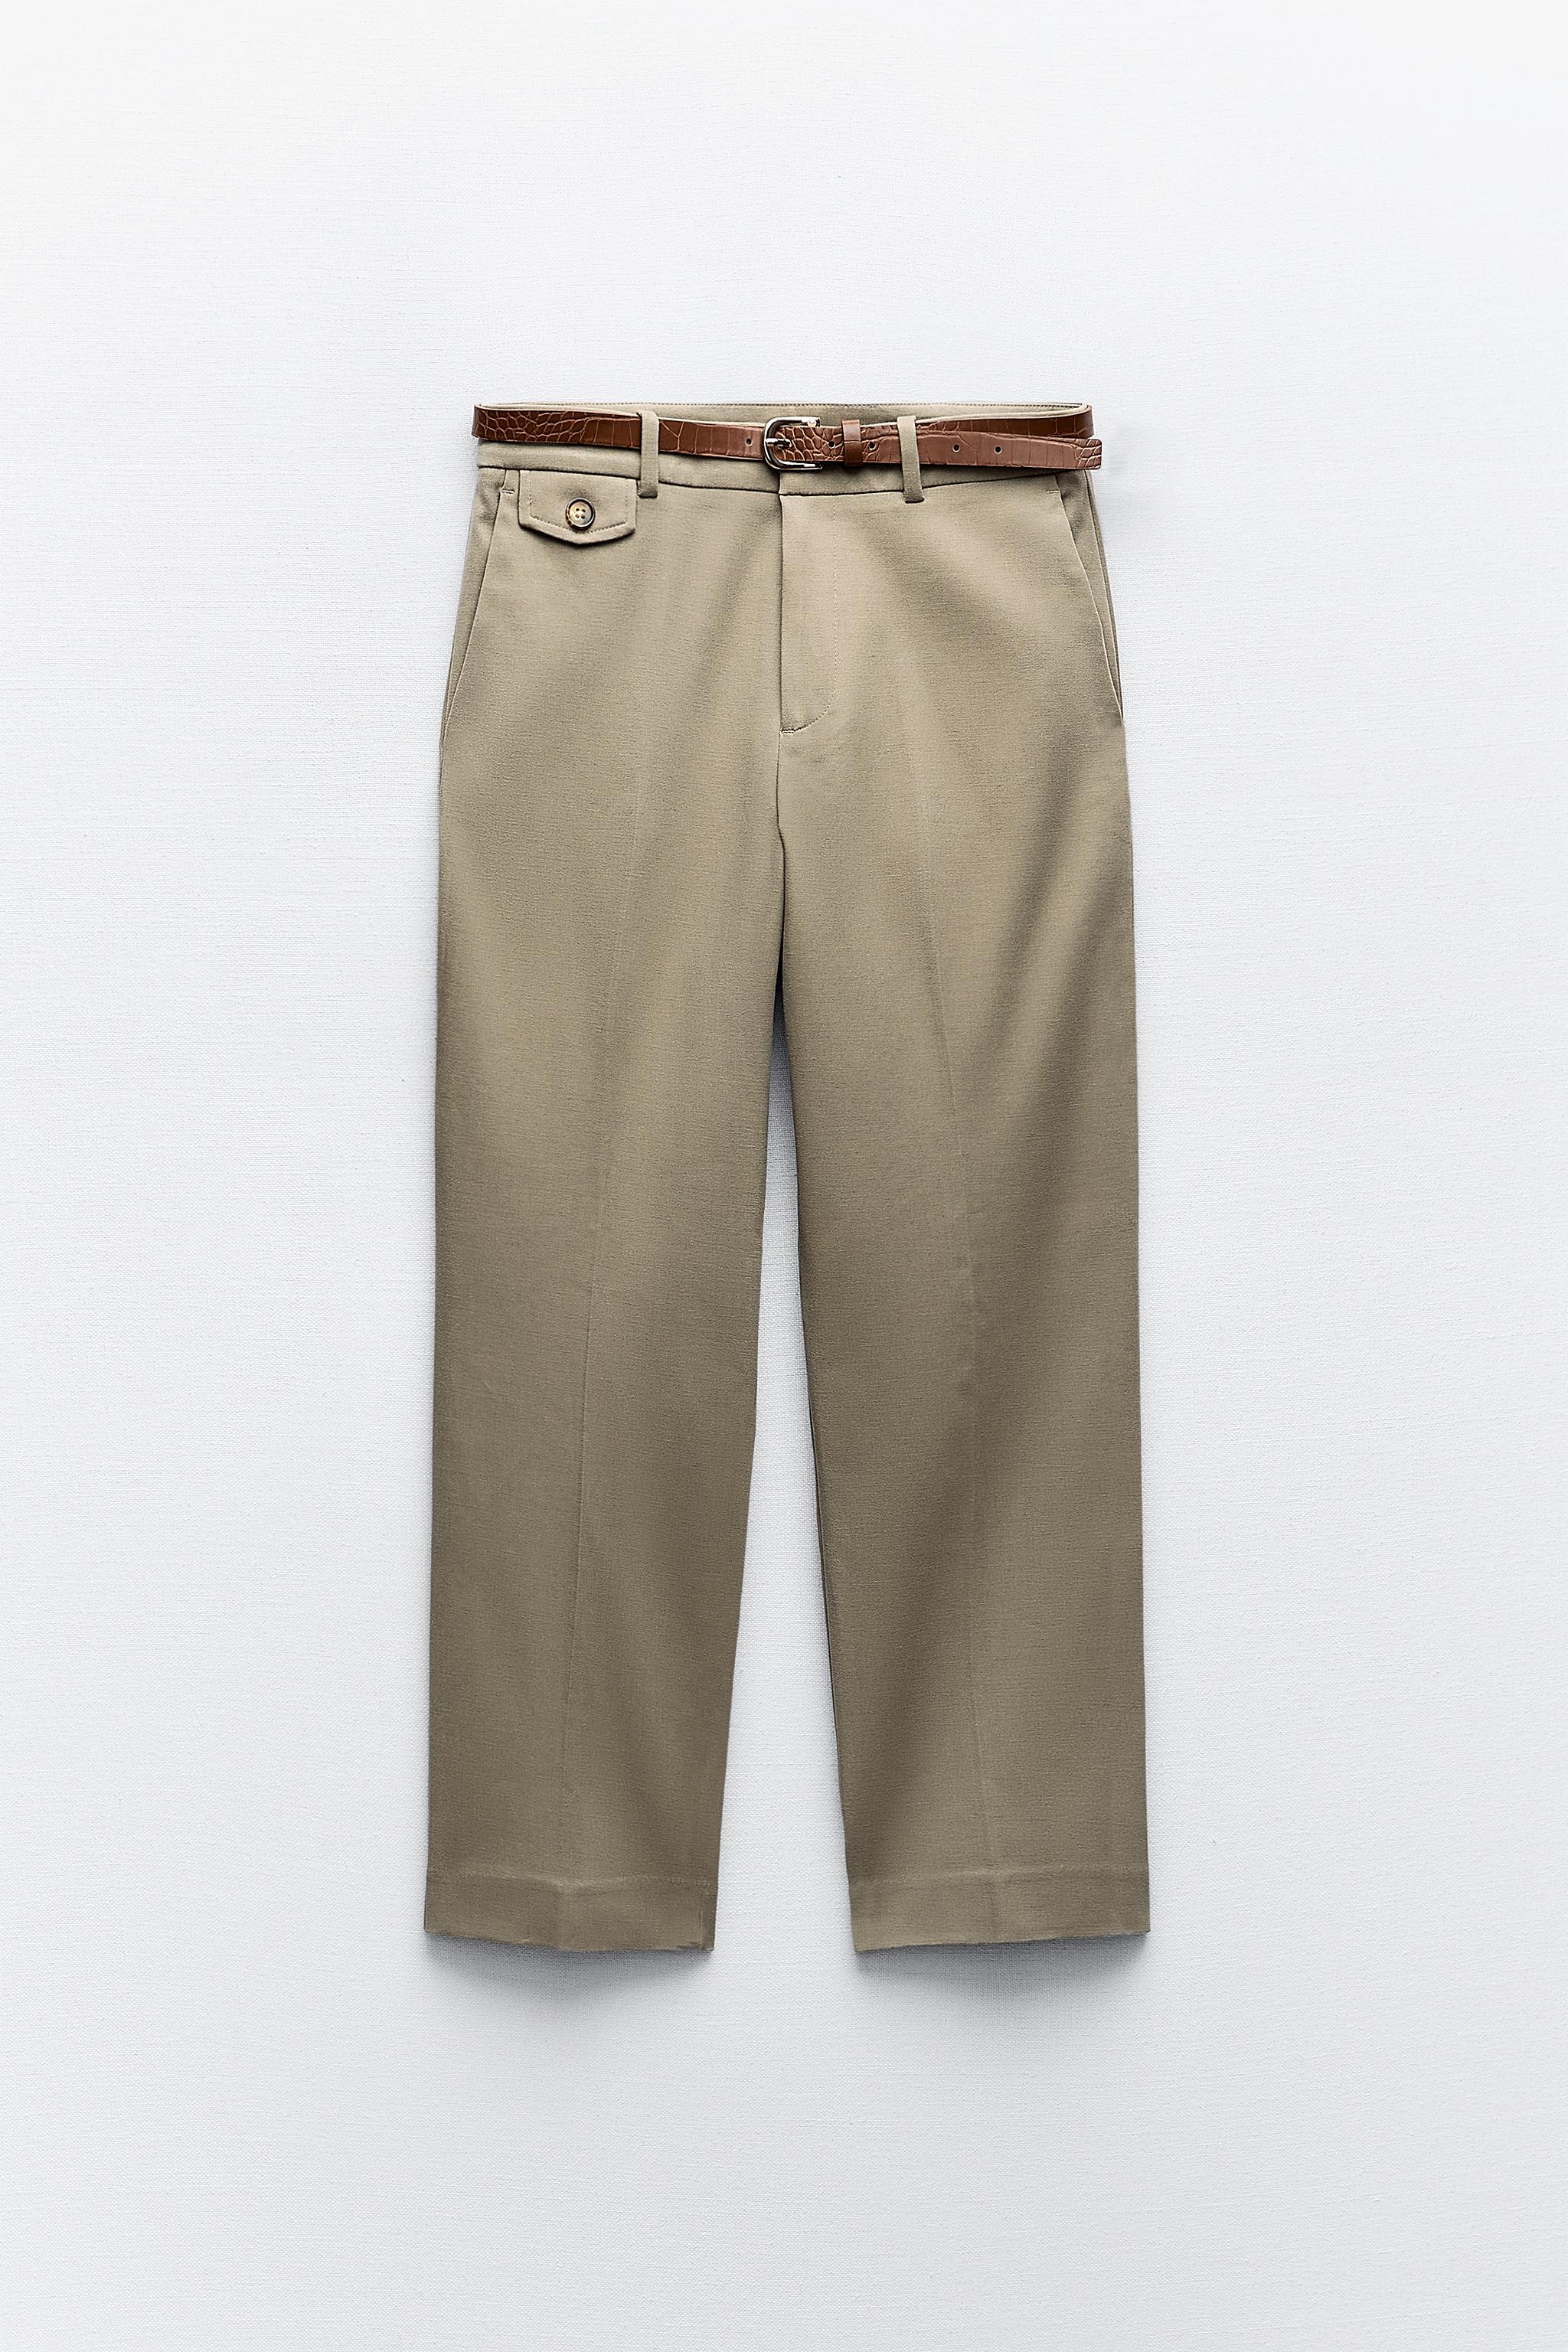 These belted pants from Zara are part of my uniform. I have them